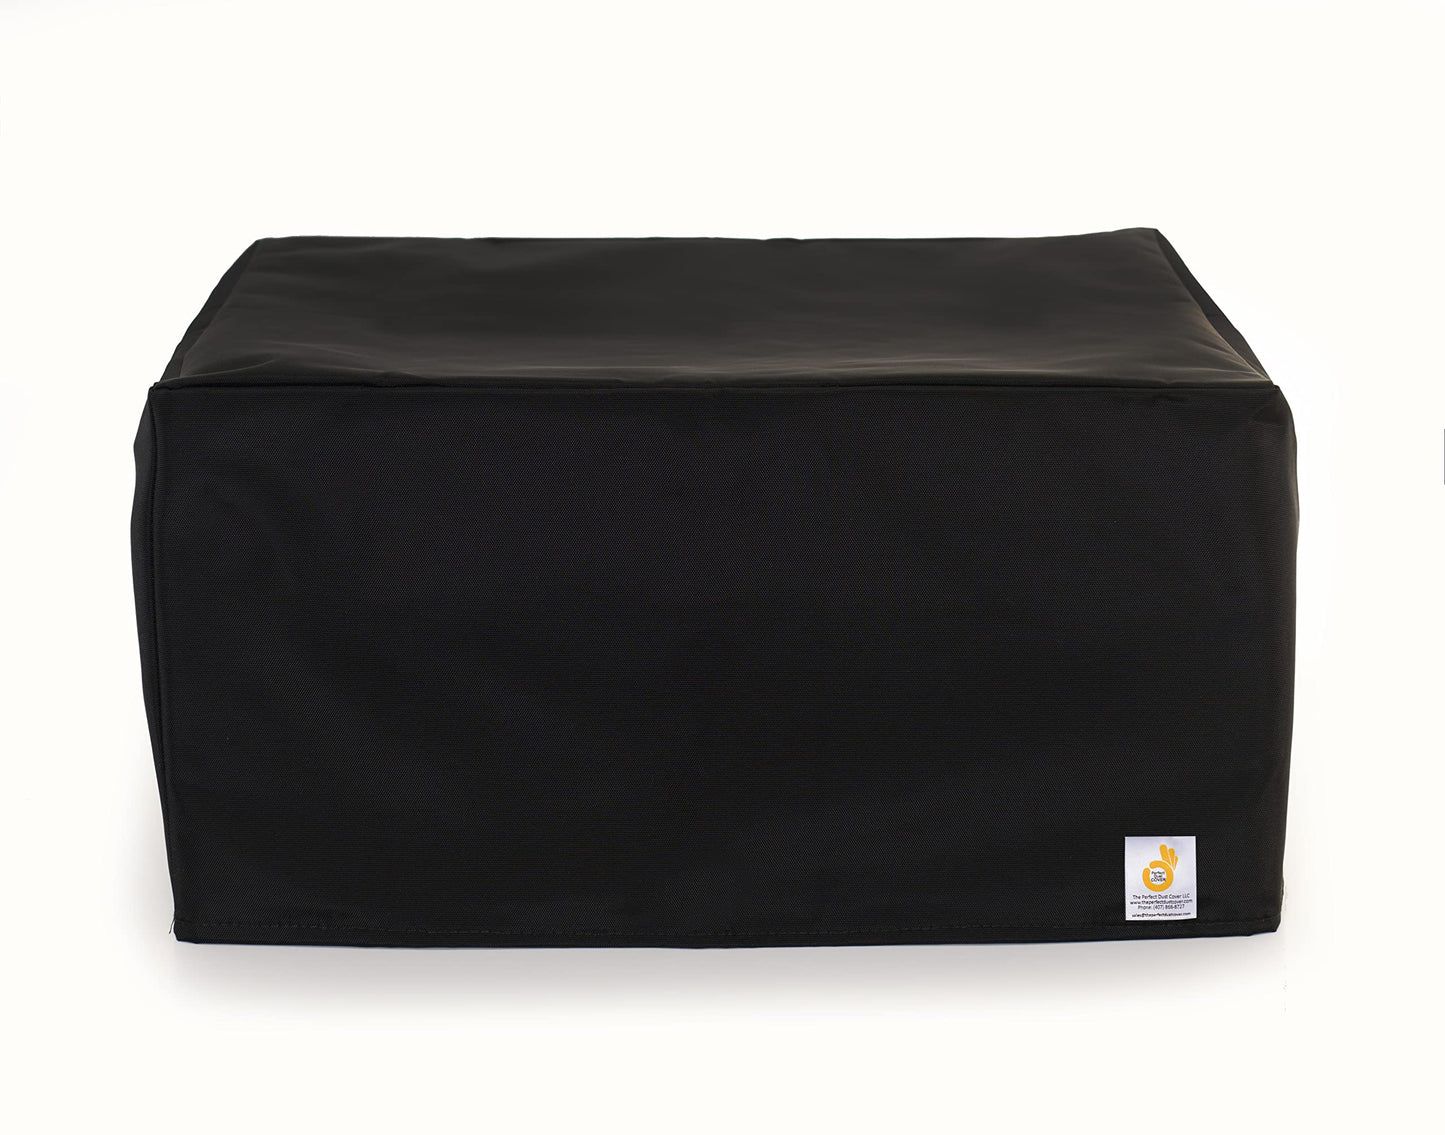 The Perfect Dust Cover, Black Nylon Cover Compatible with HP LaserJet Pro MFP 4102dw Printer, Anti-Static, Double Stitched and Waterproof Dust Cover Dimensions 16.6''W x 15.4''D x 13.1''H by The Perfect Dust Cover LLC